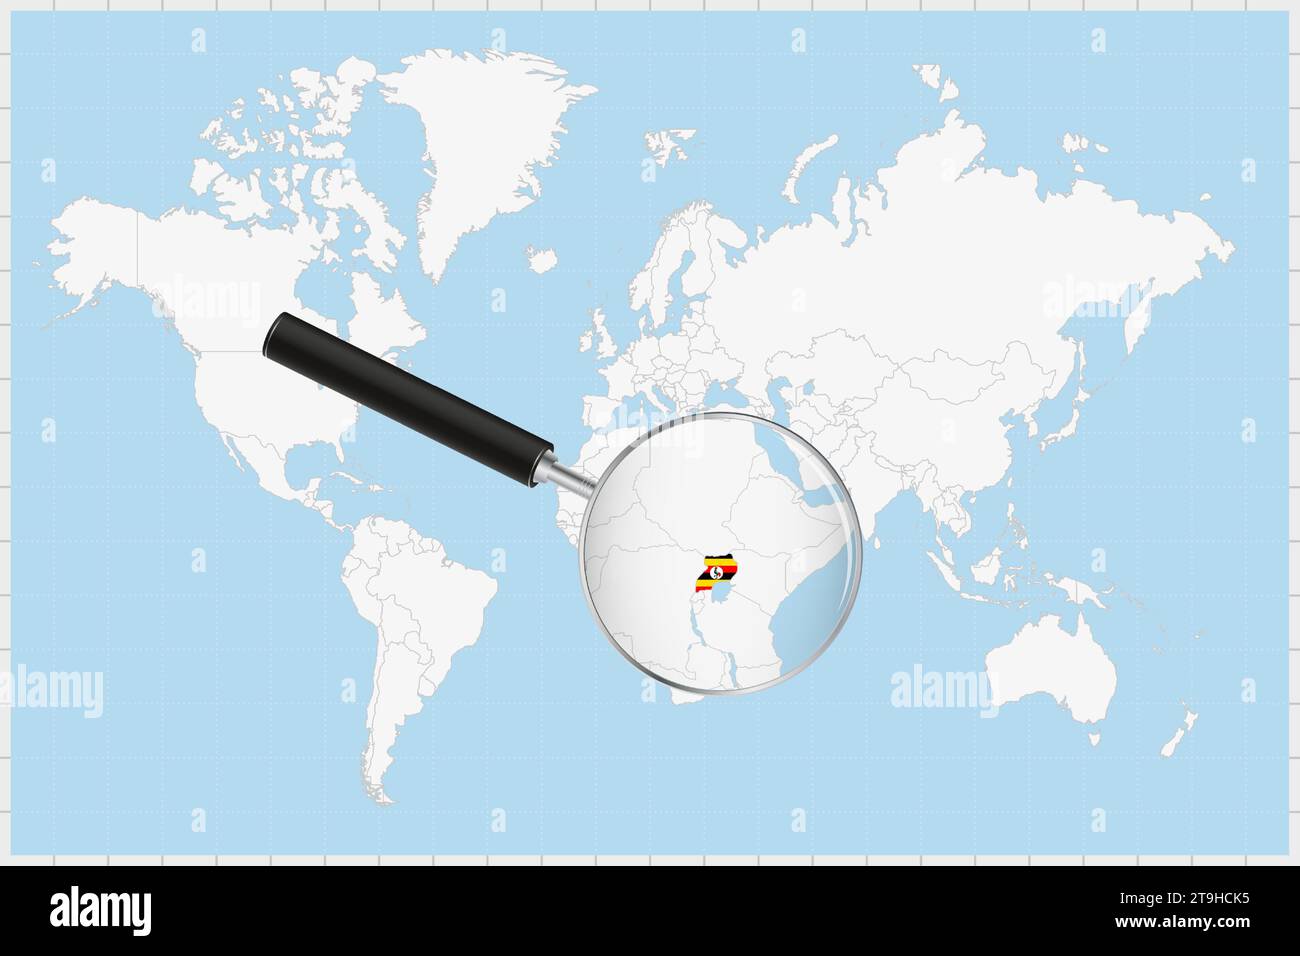 Magnifying glass showing a map of Uganda on a world map. Uganda flag and map enlarge in lens. Vector Illustration. Stock Vector